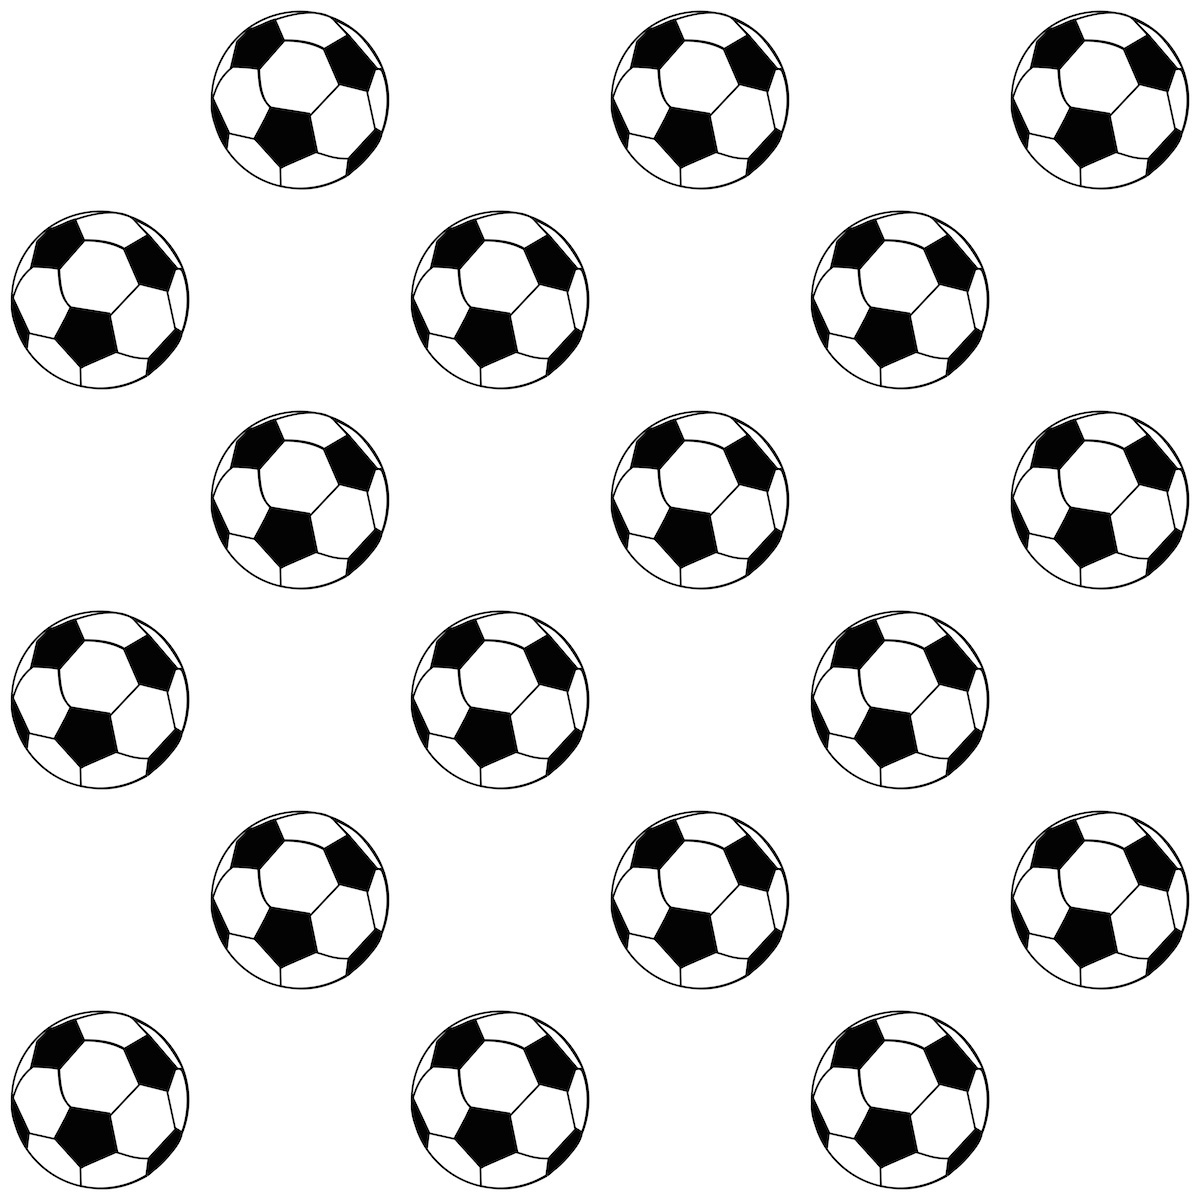 30 Images Of Free Football Template To Print | Bfegy - Free Printable Football Templates